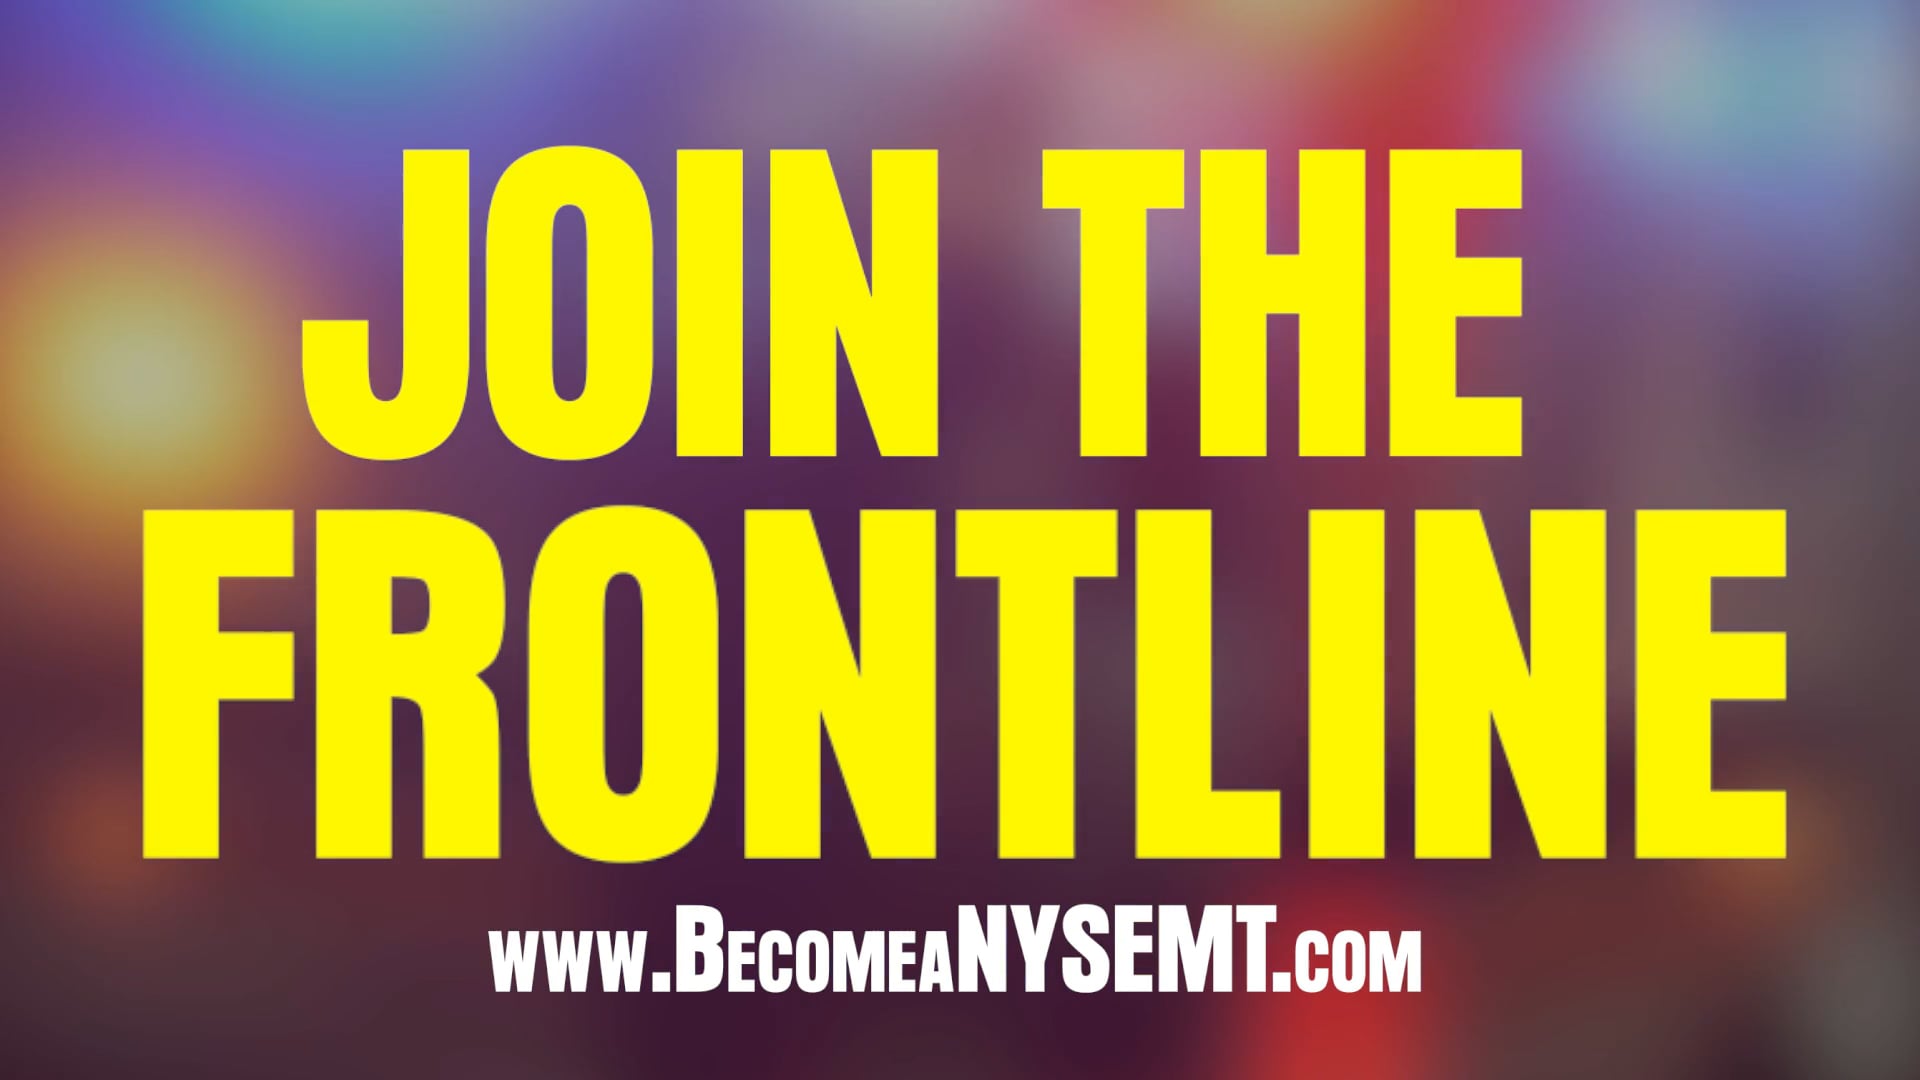 BECOME A NYS EMT: Join the Frontline